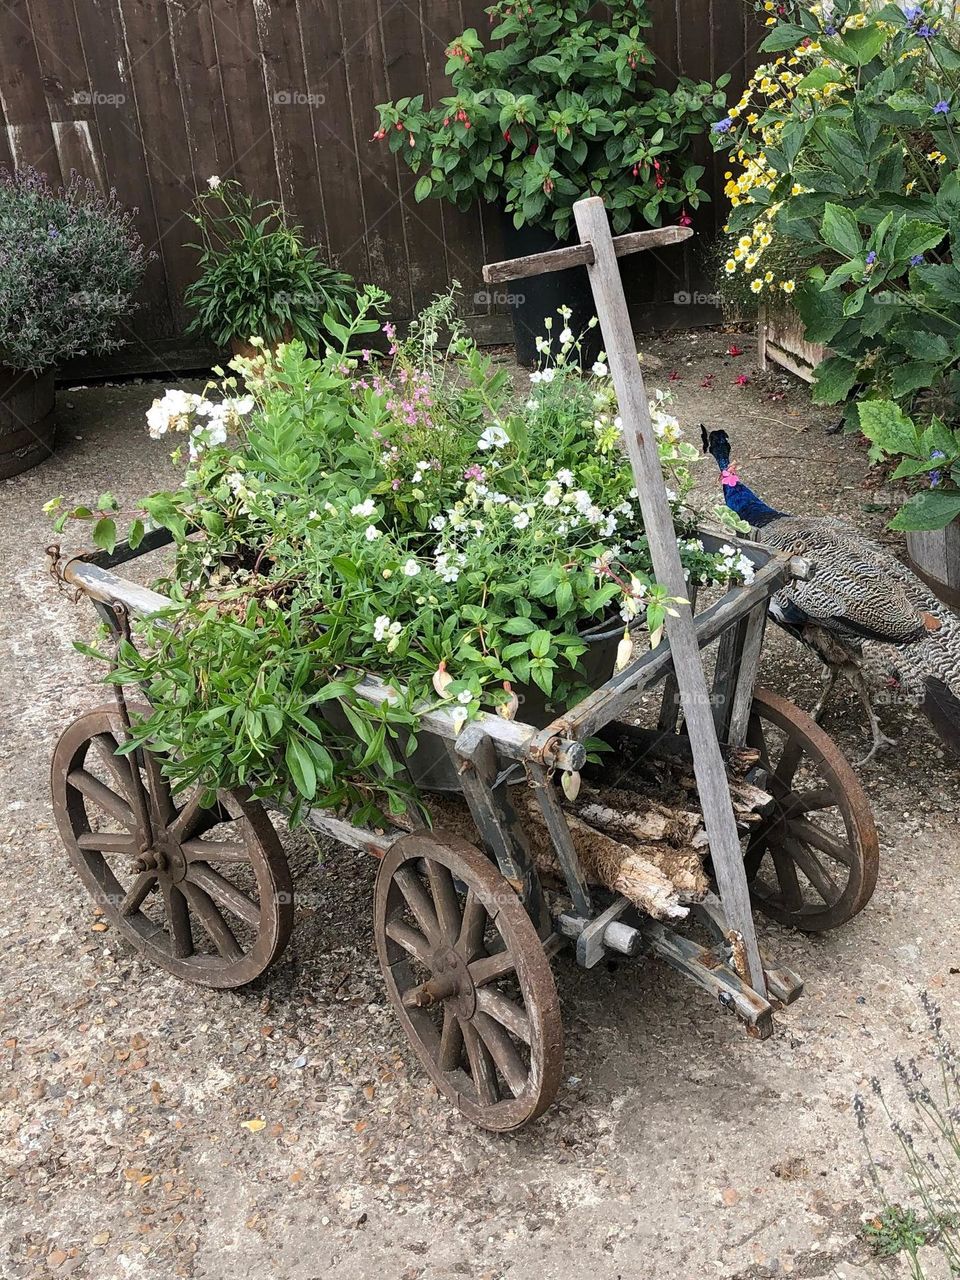 classic farm greenery in a kart alsof known as a pulling trolley